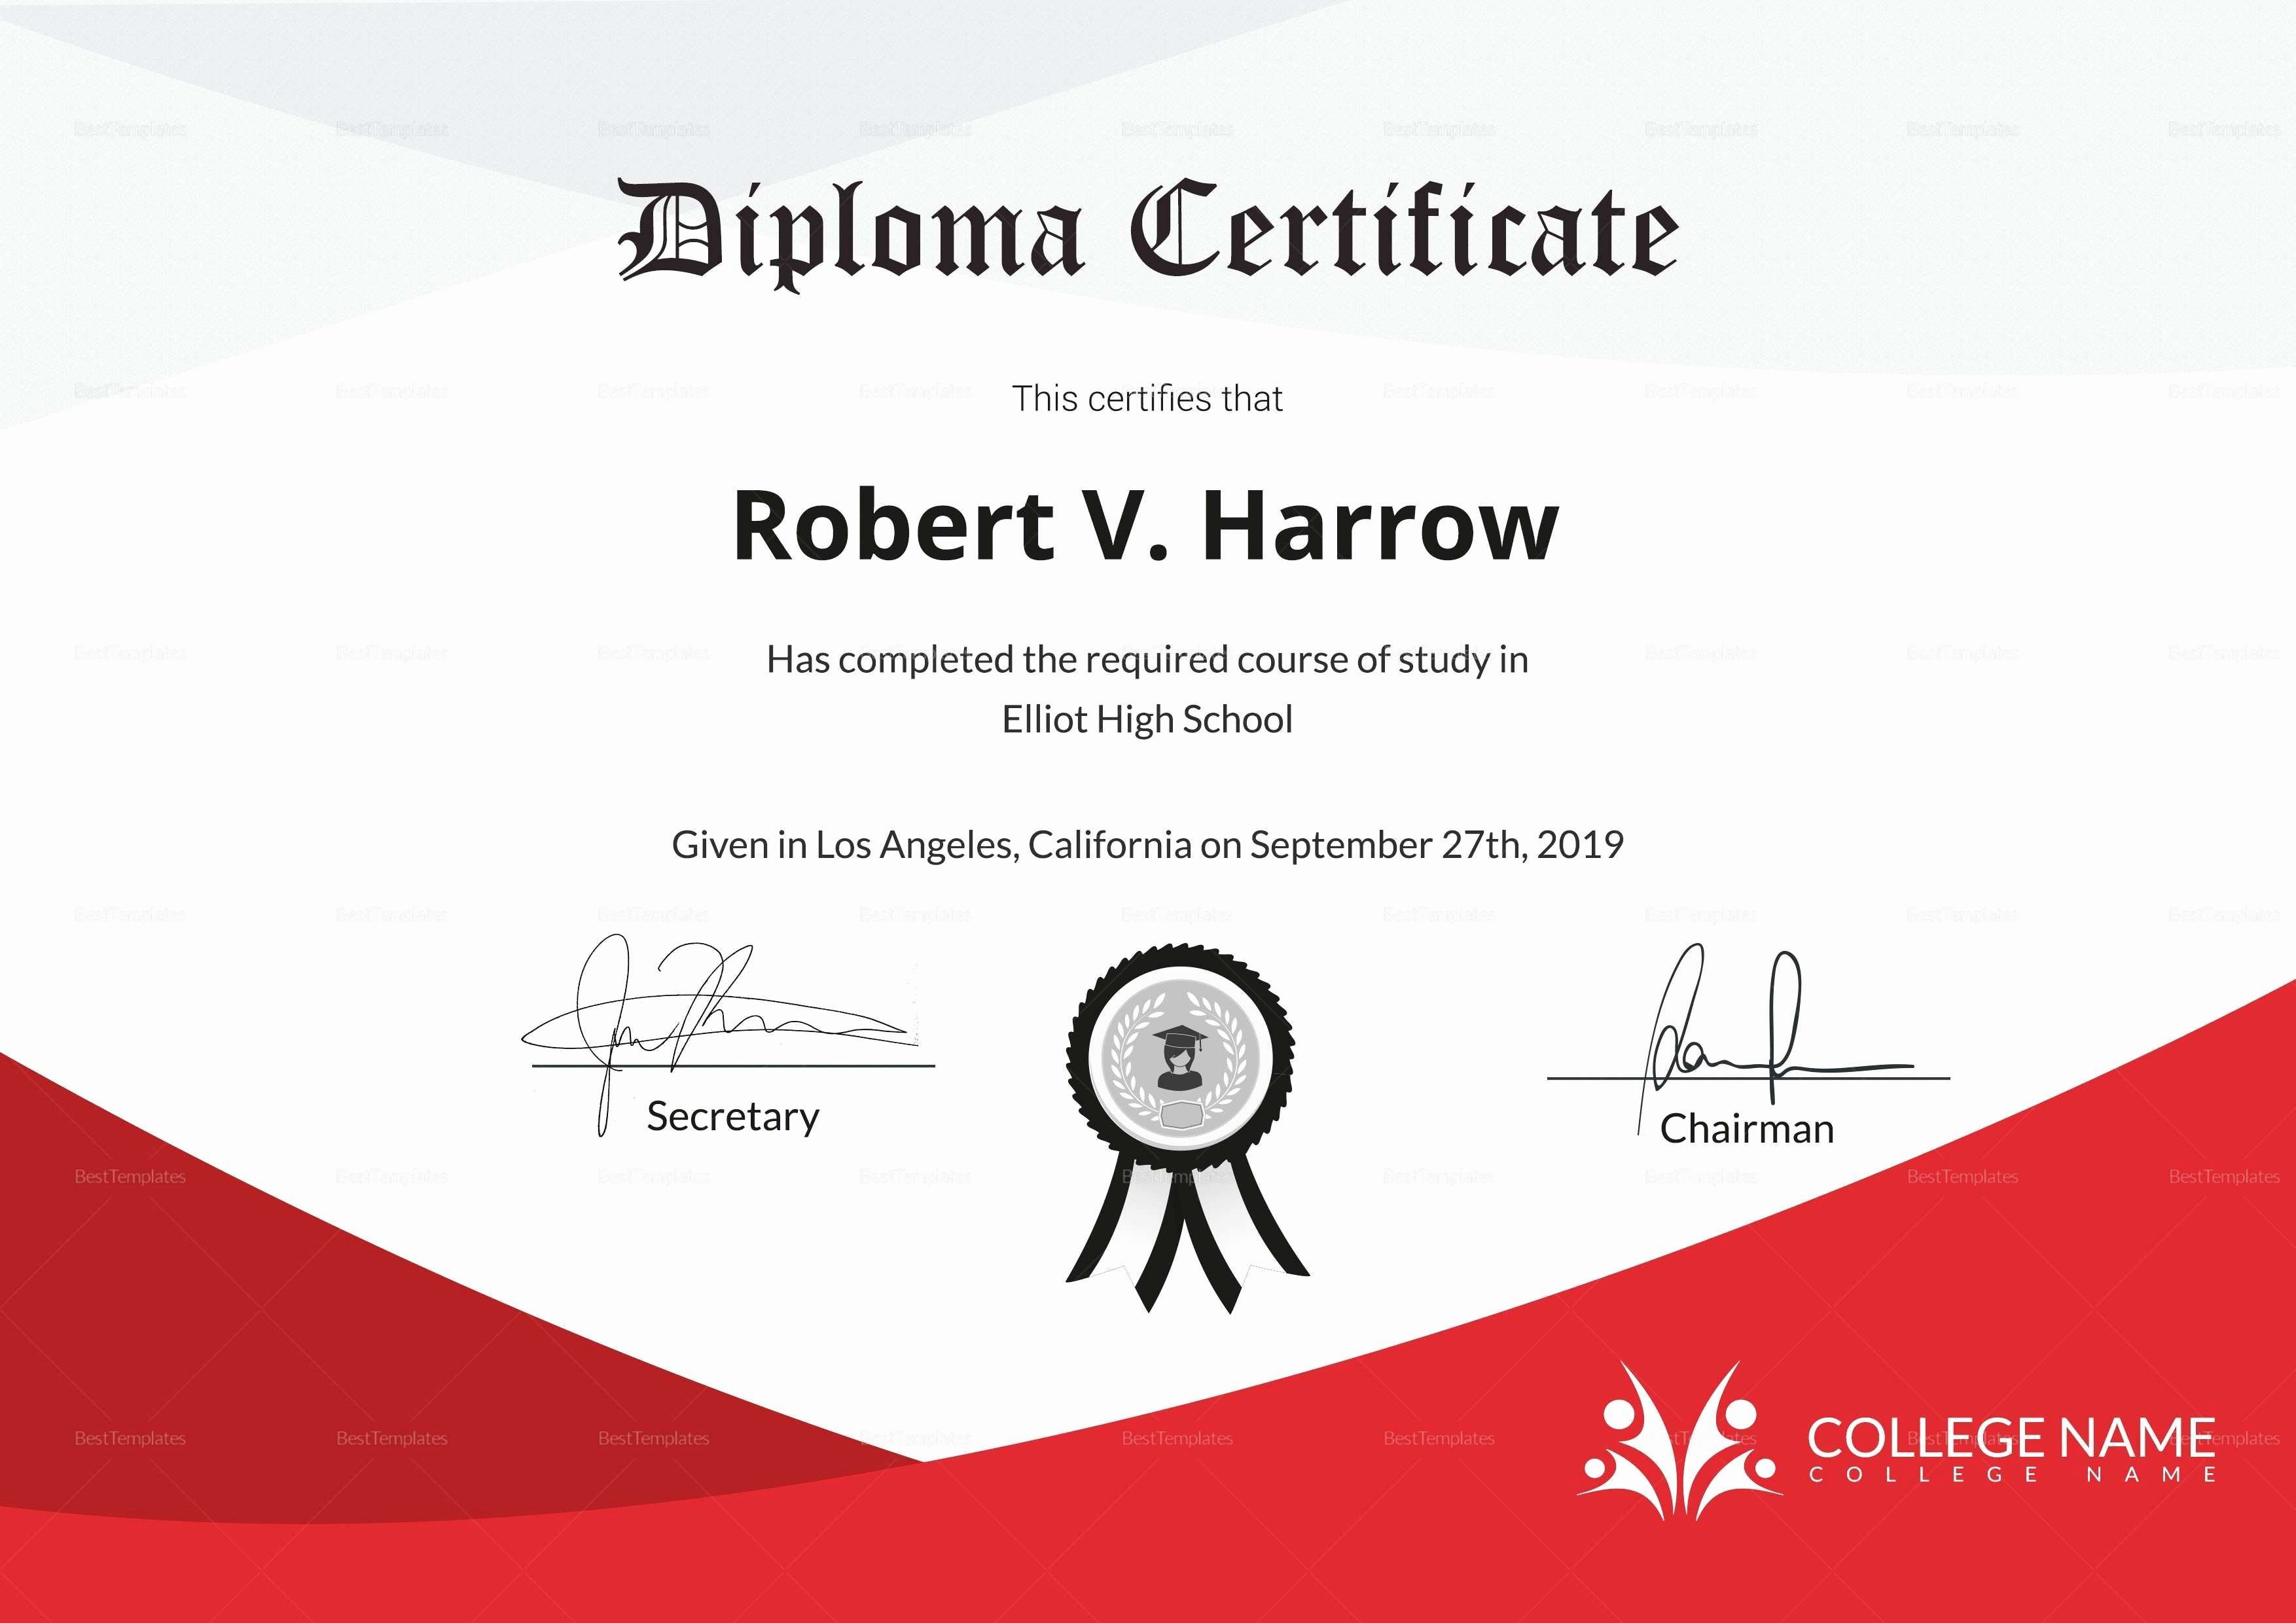 College Diploma Template Pdf Awesome Awesome Free High School Diploma Template with Seal Pdf